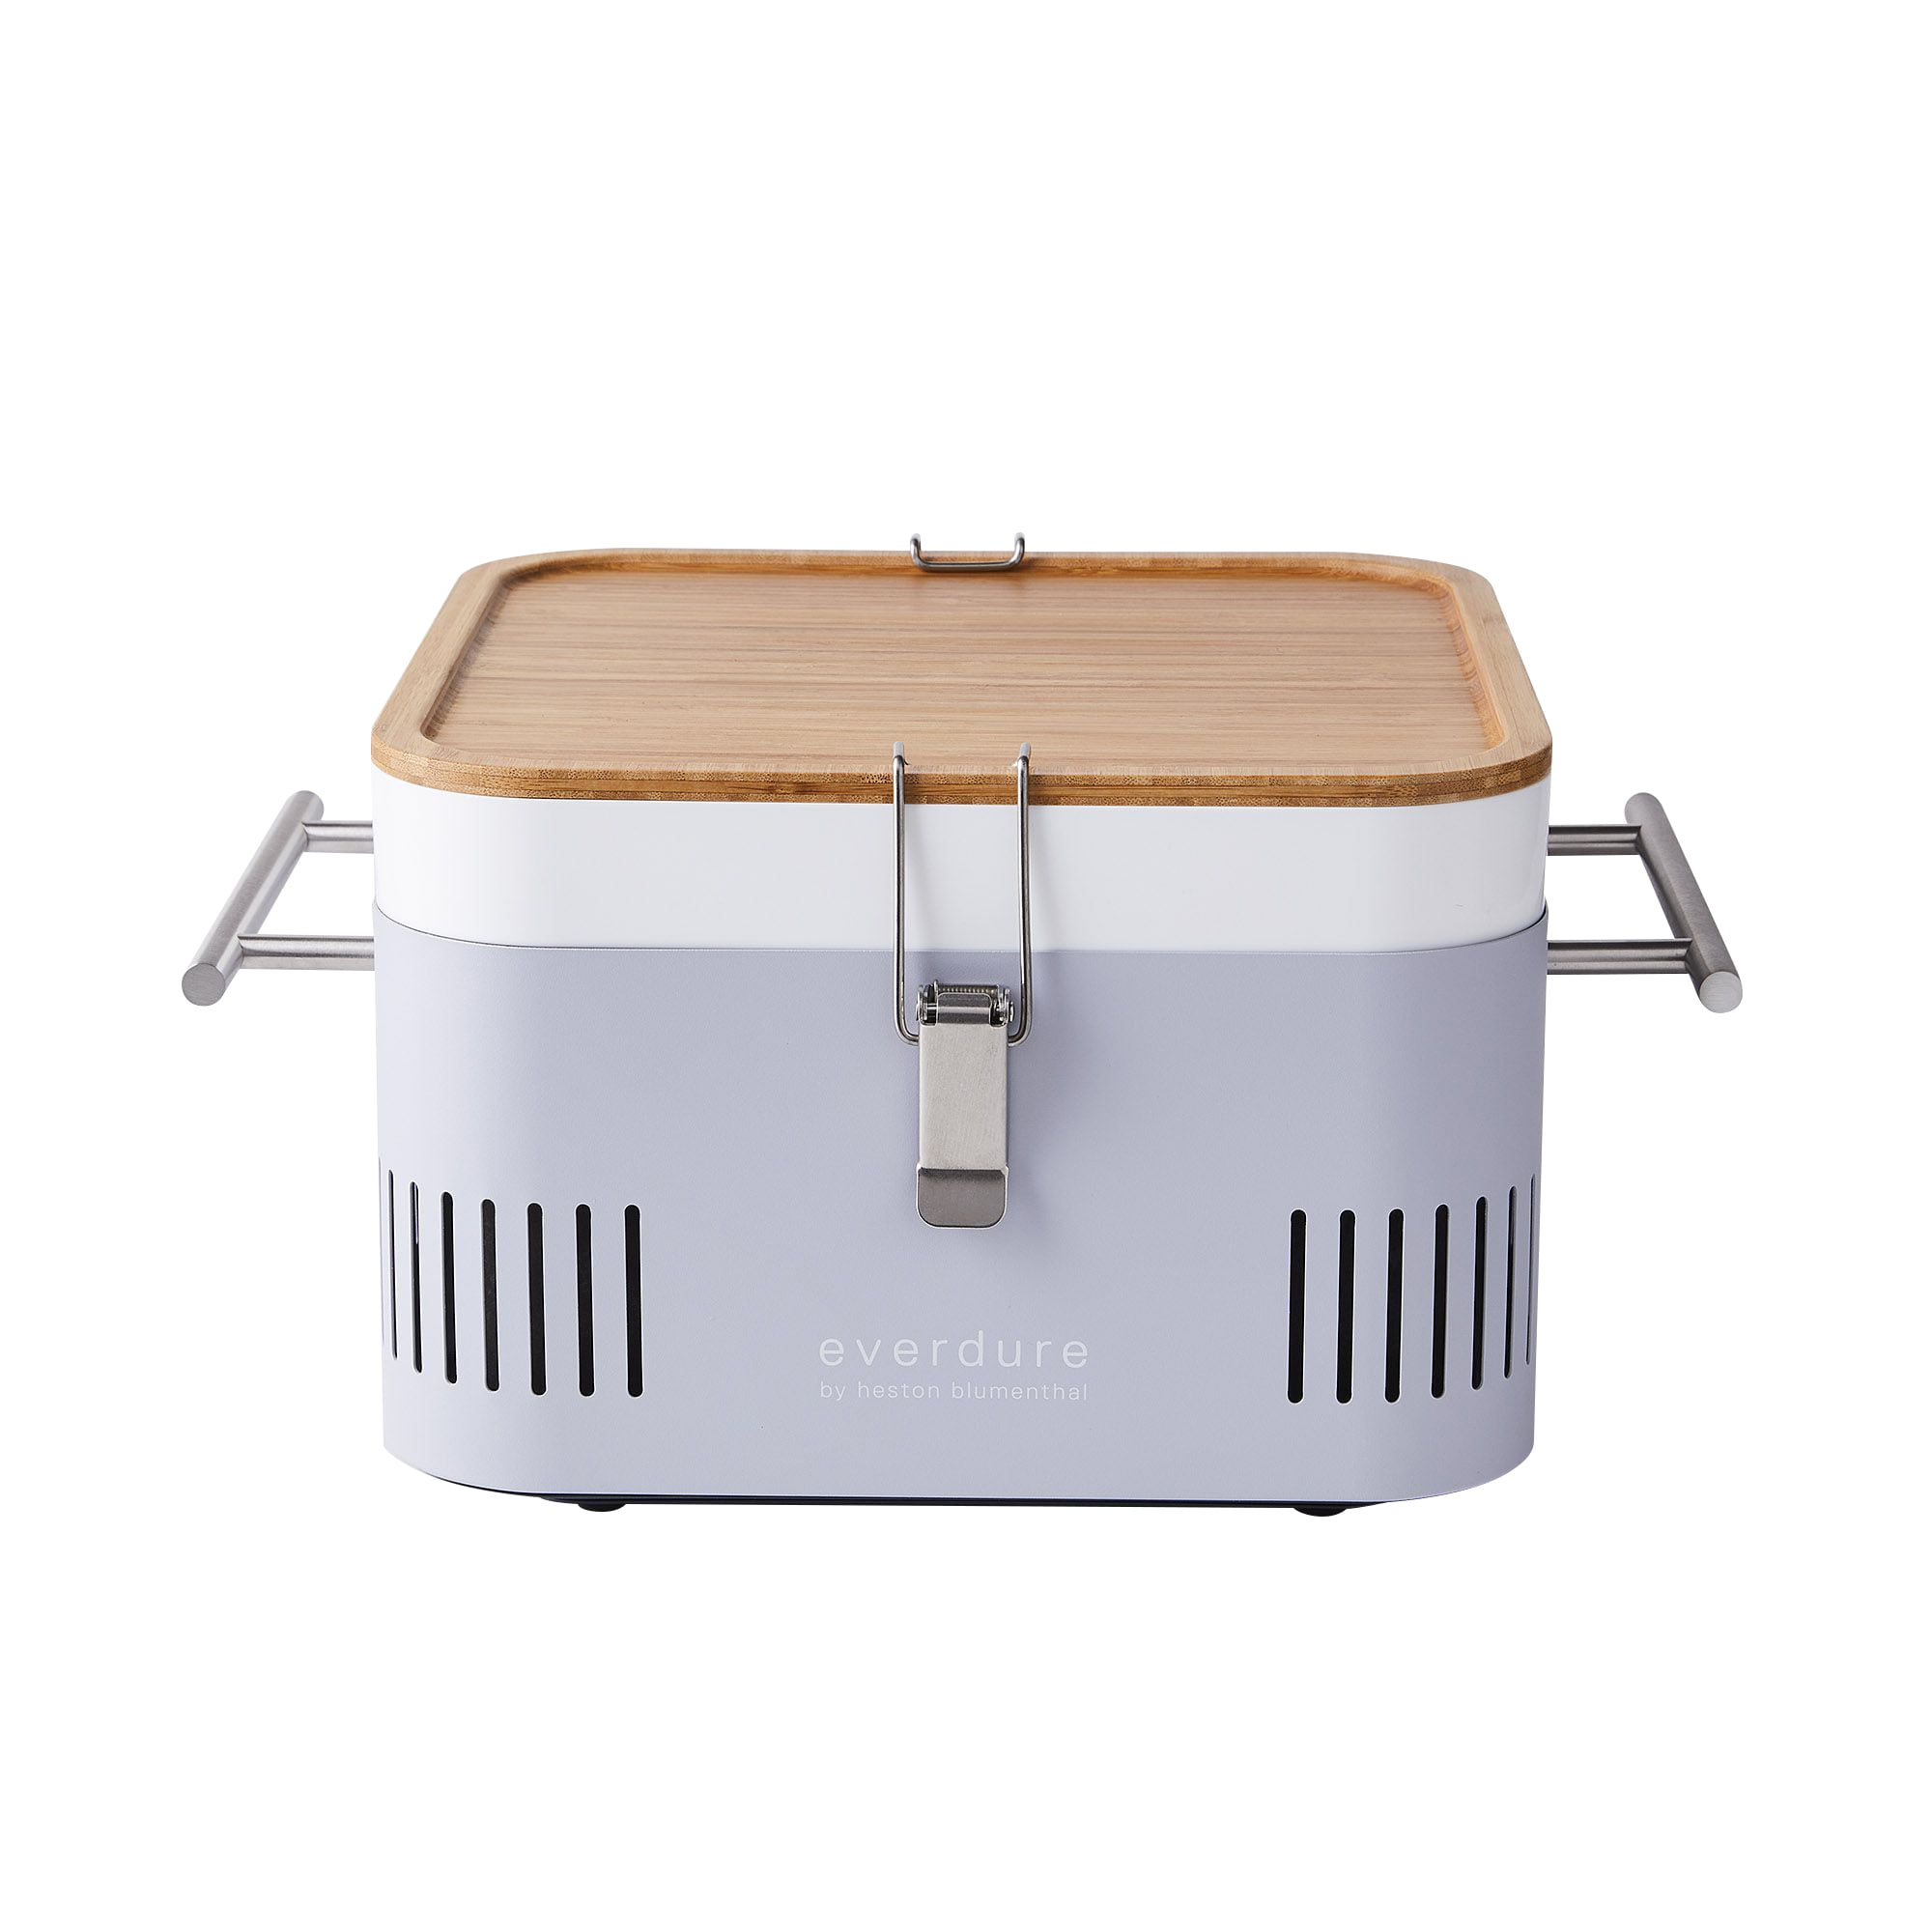 Everdure CUBE Charcoal Grill with Cool Touch Handles, Container and Board - Walmart.com